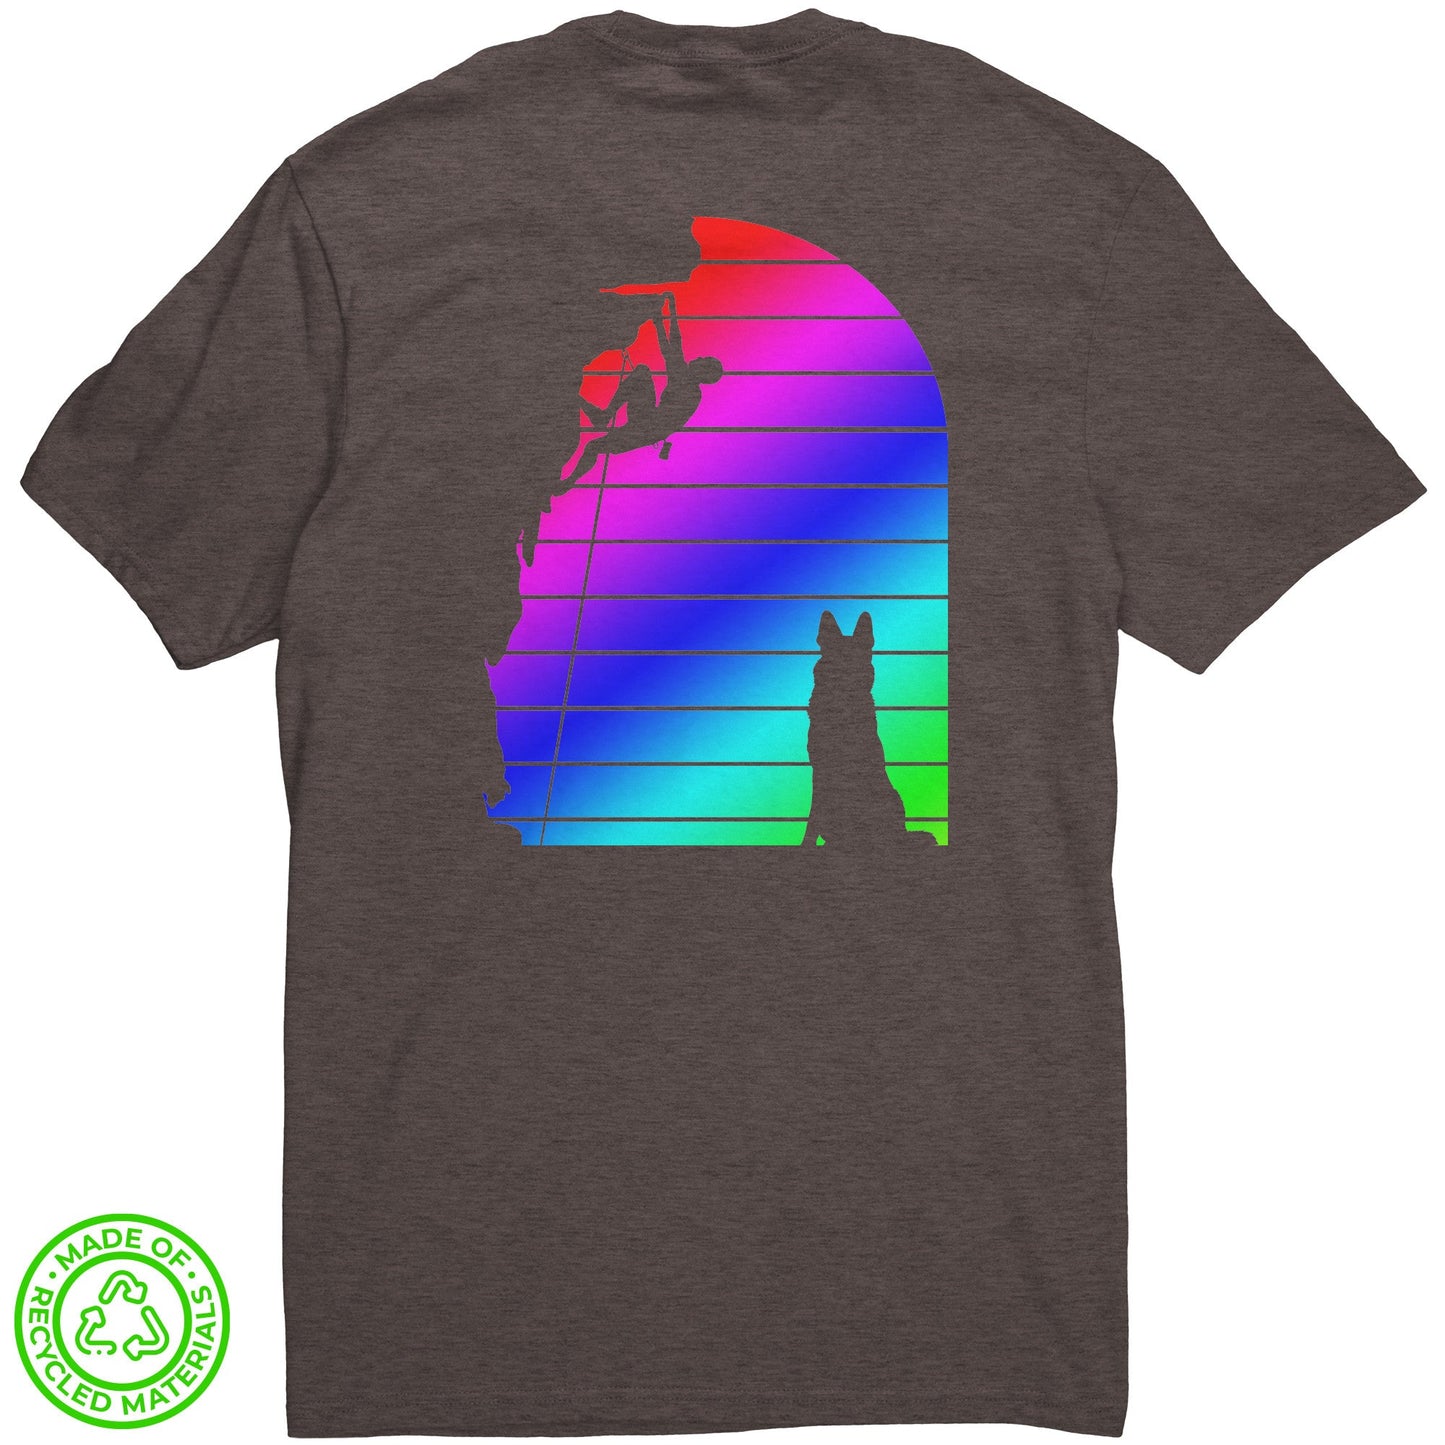 Eco-Friendly Re-Tee (Rainbow Silhouetted climber and shepherd)